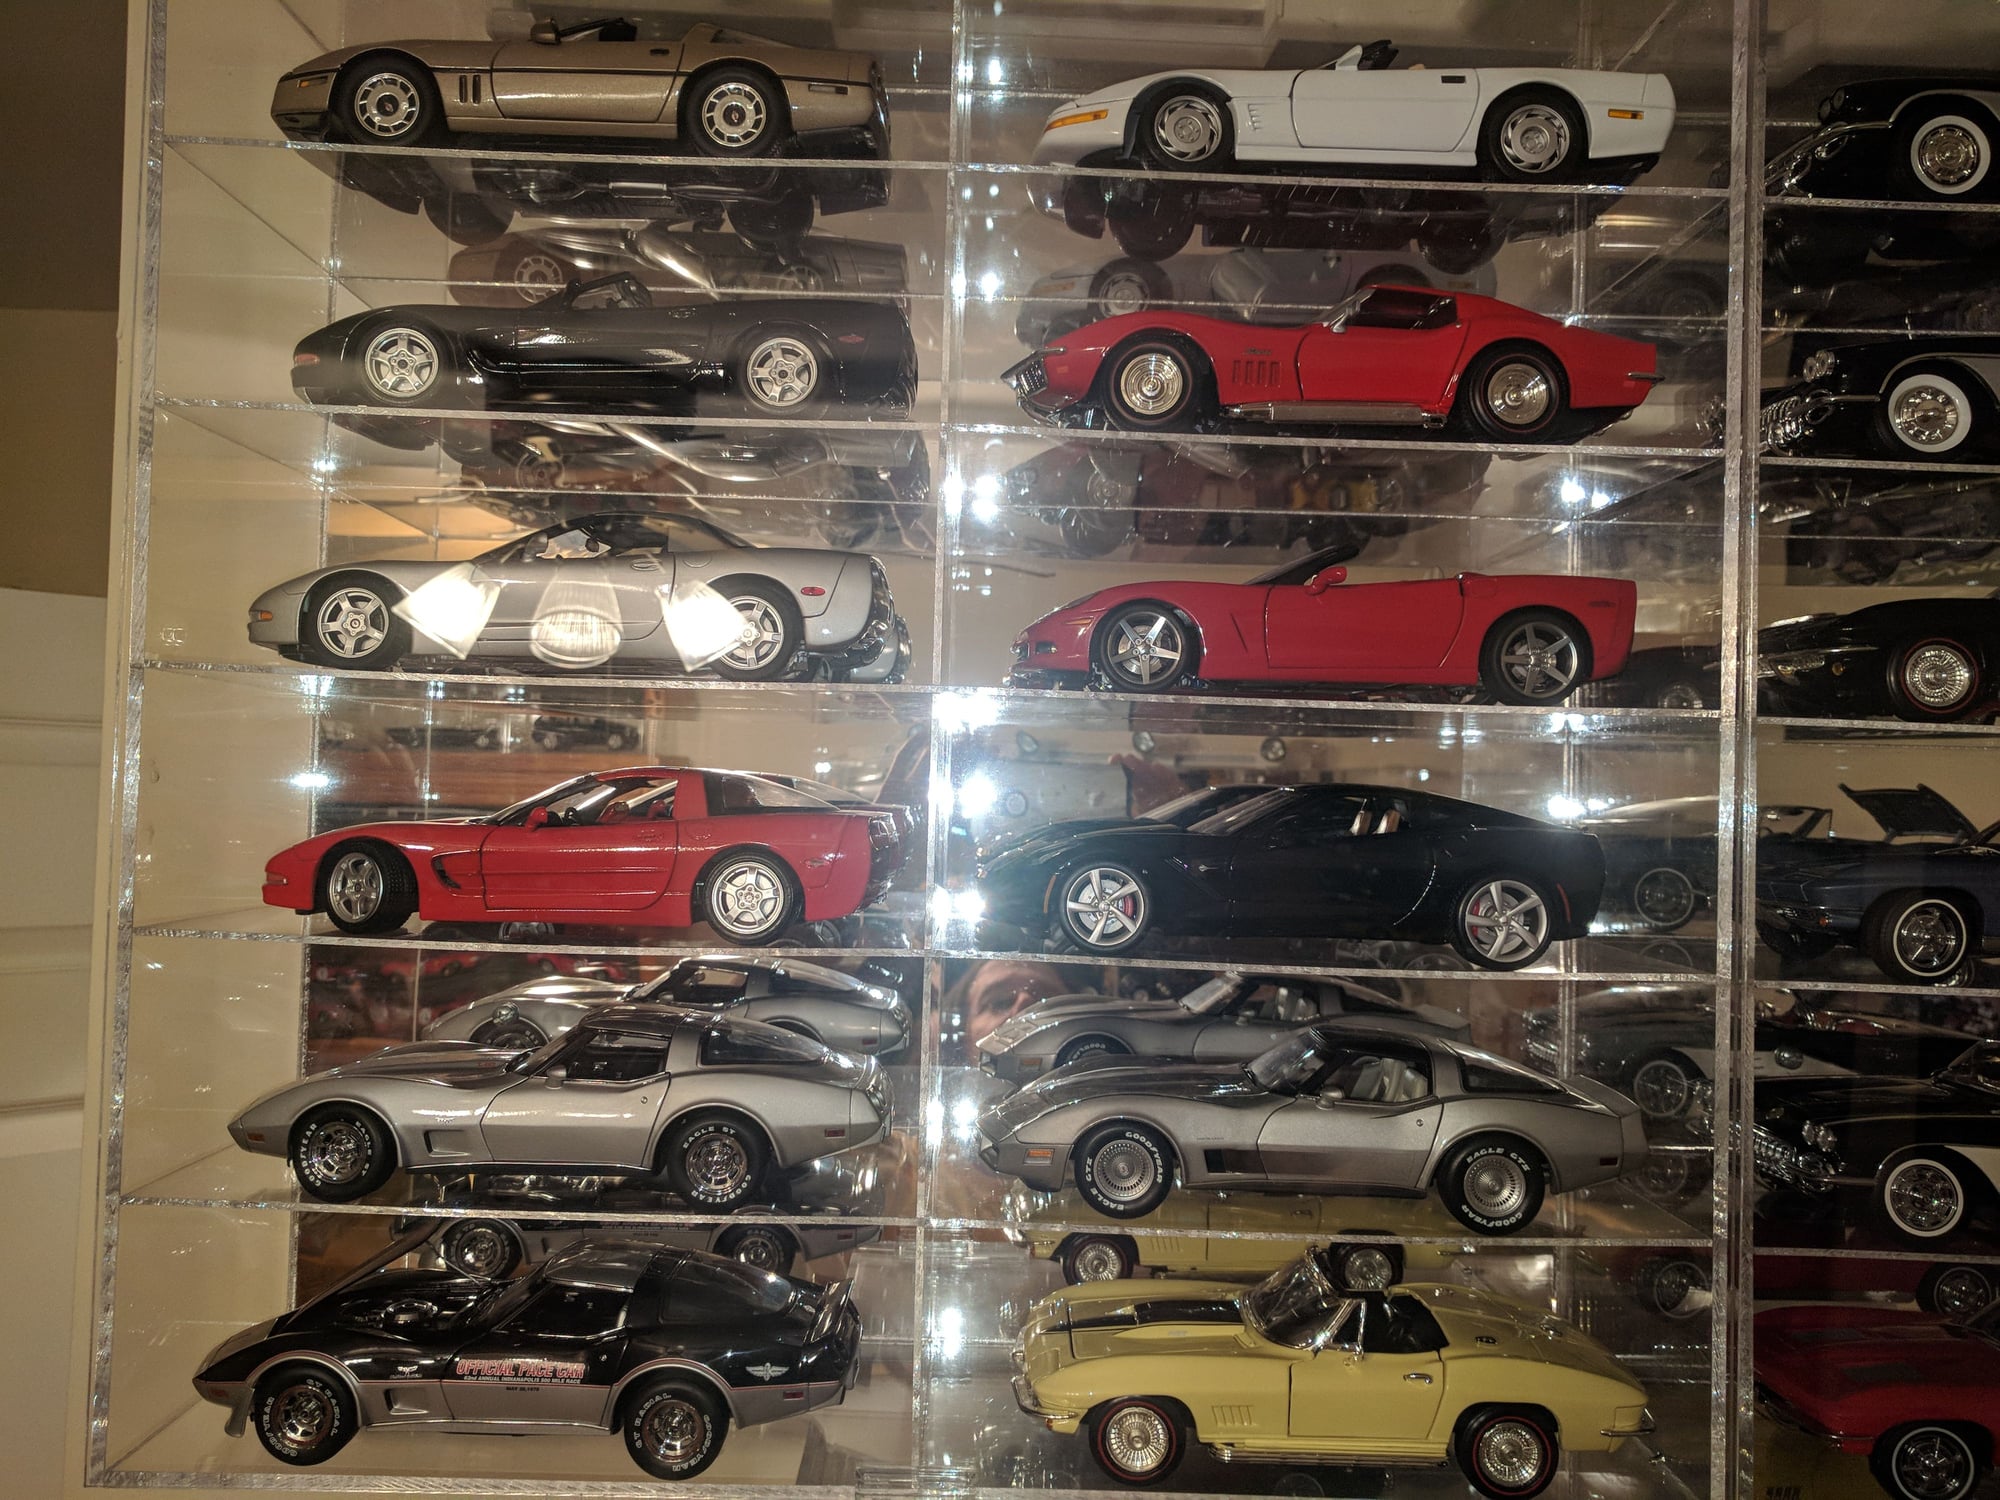 buying diecast collections